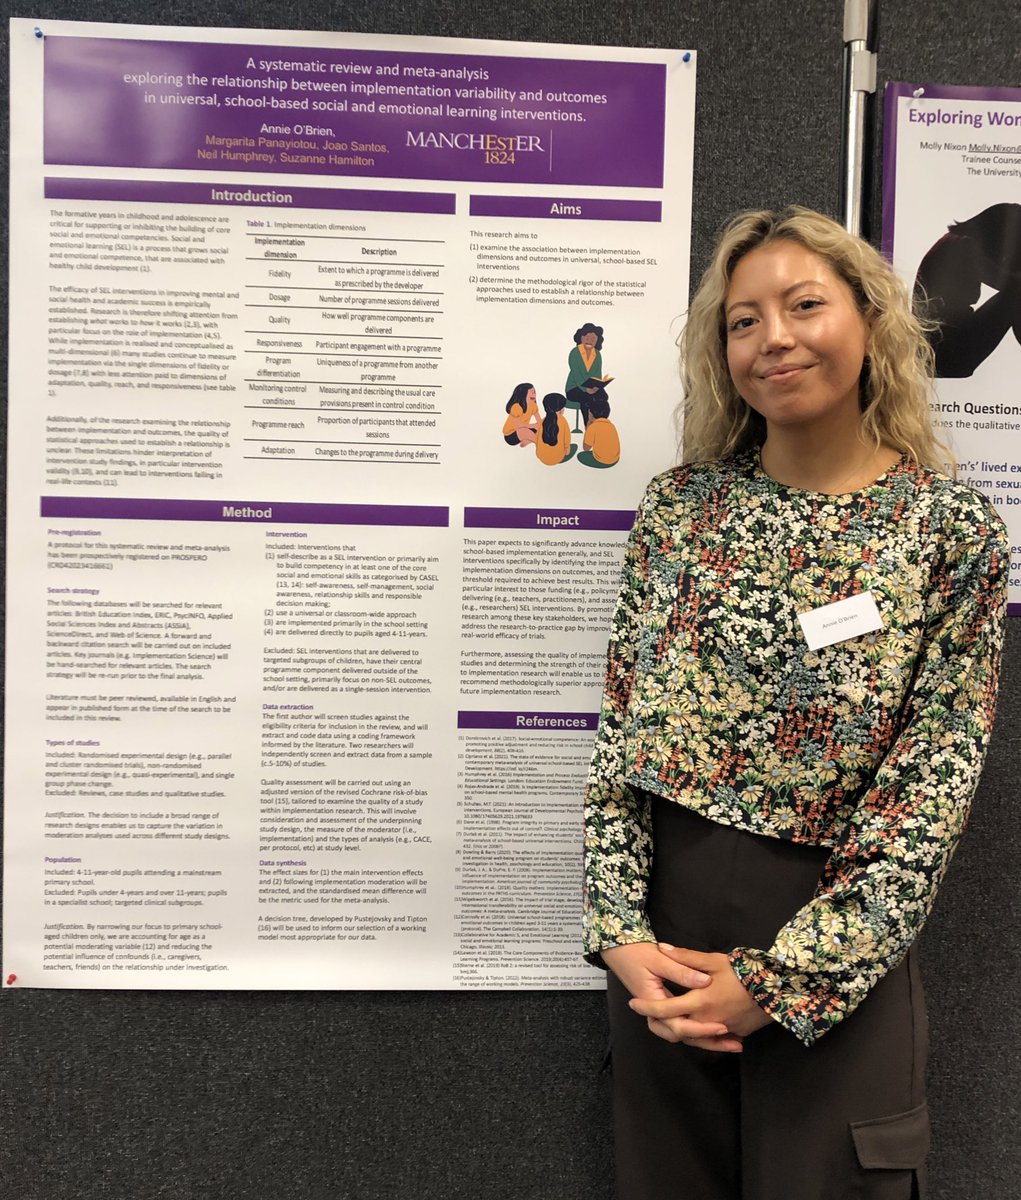 Delighted to attend the SEED PGR Conference @PGRConfSEED this week and present an overview of my first year PhD research with @Margarita_KP @neilhumphreyUoM and Joao Santos to other SEED colleagues ☺️ @PGRSEED @OfficialUoM @EducationUoM